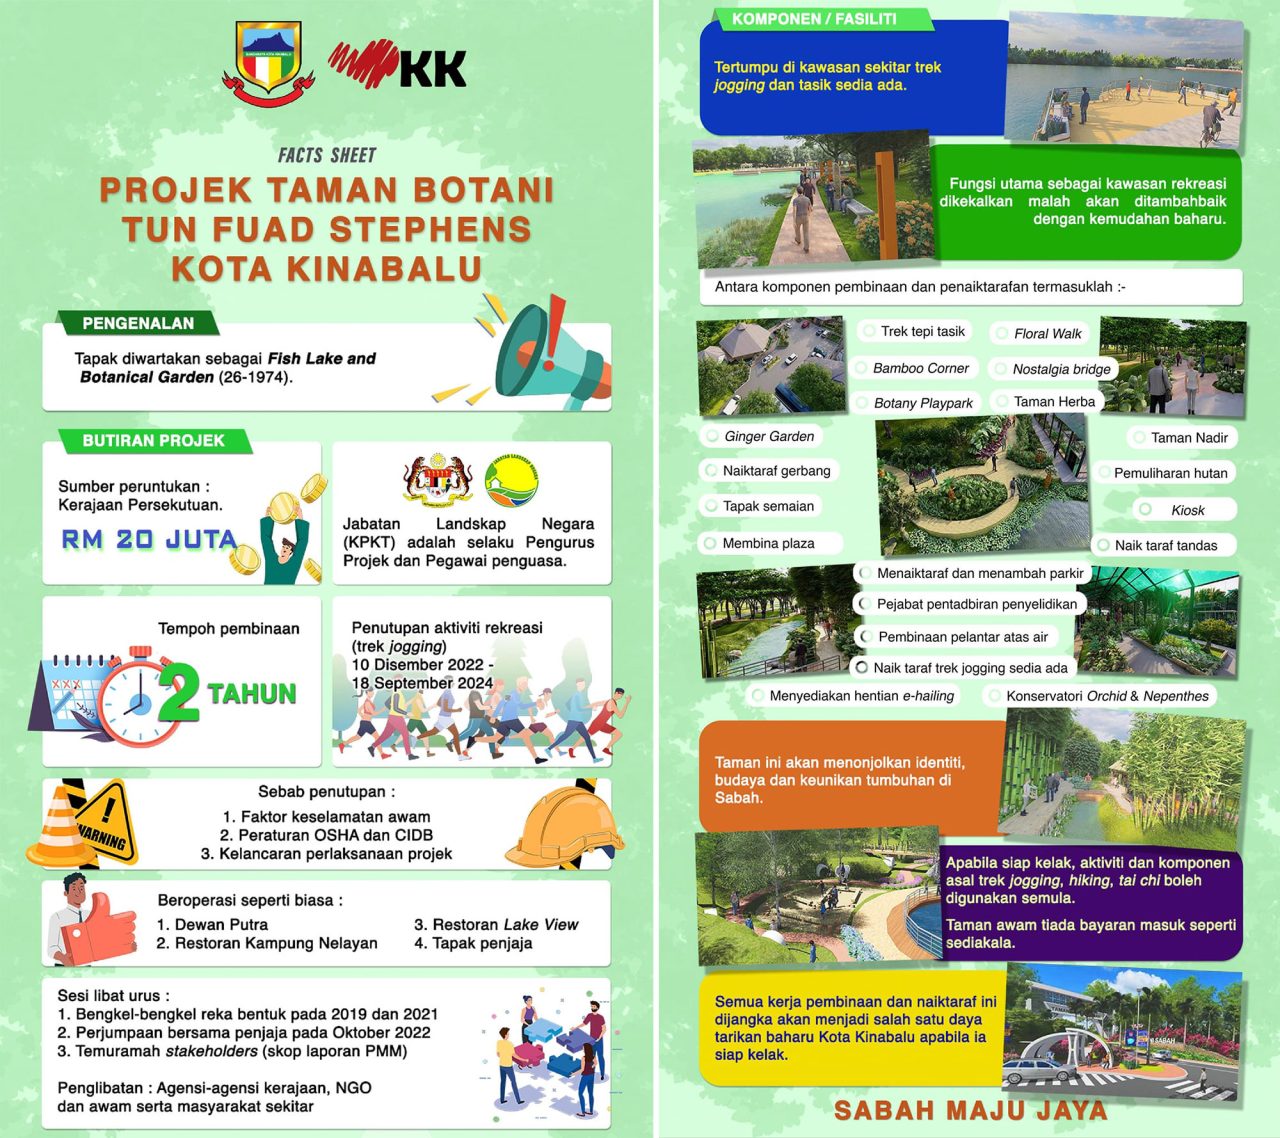 Facts Sheet of Tun Fuad Stephens Botanical Garden project